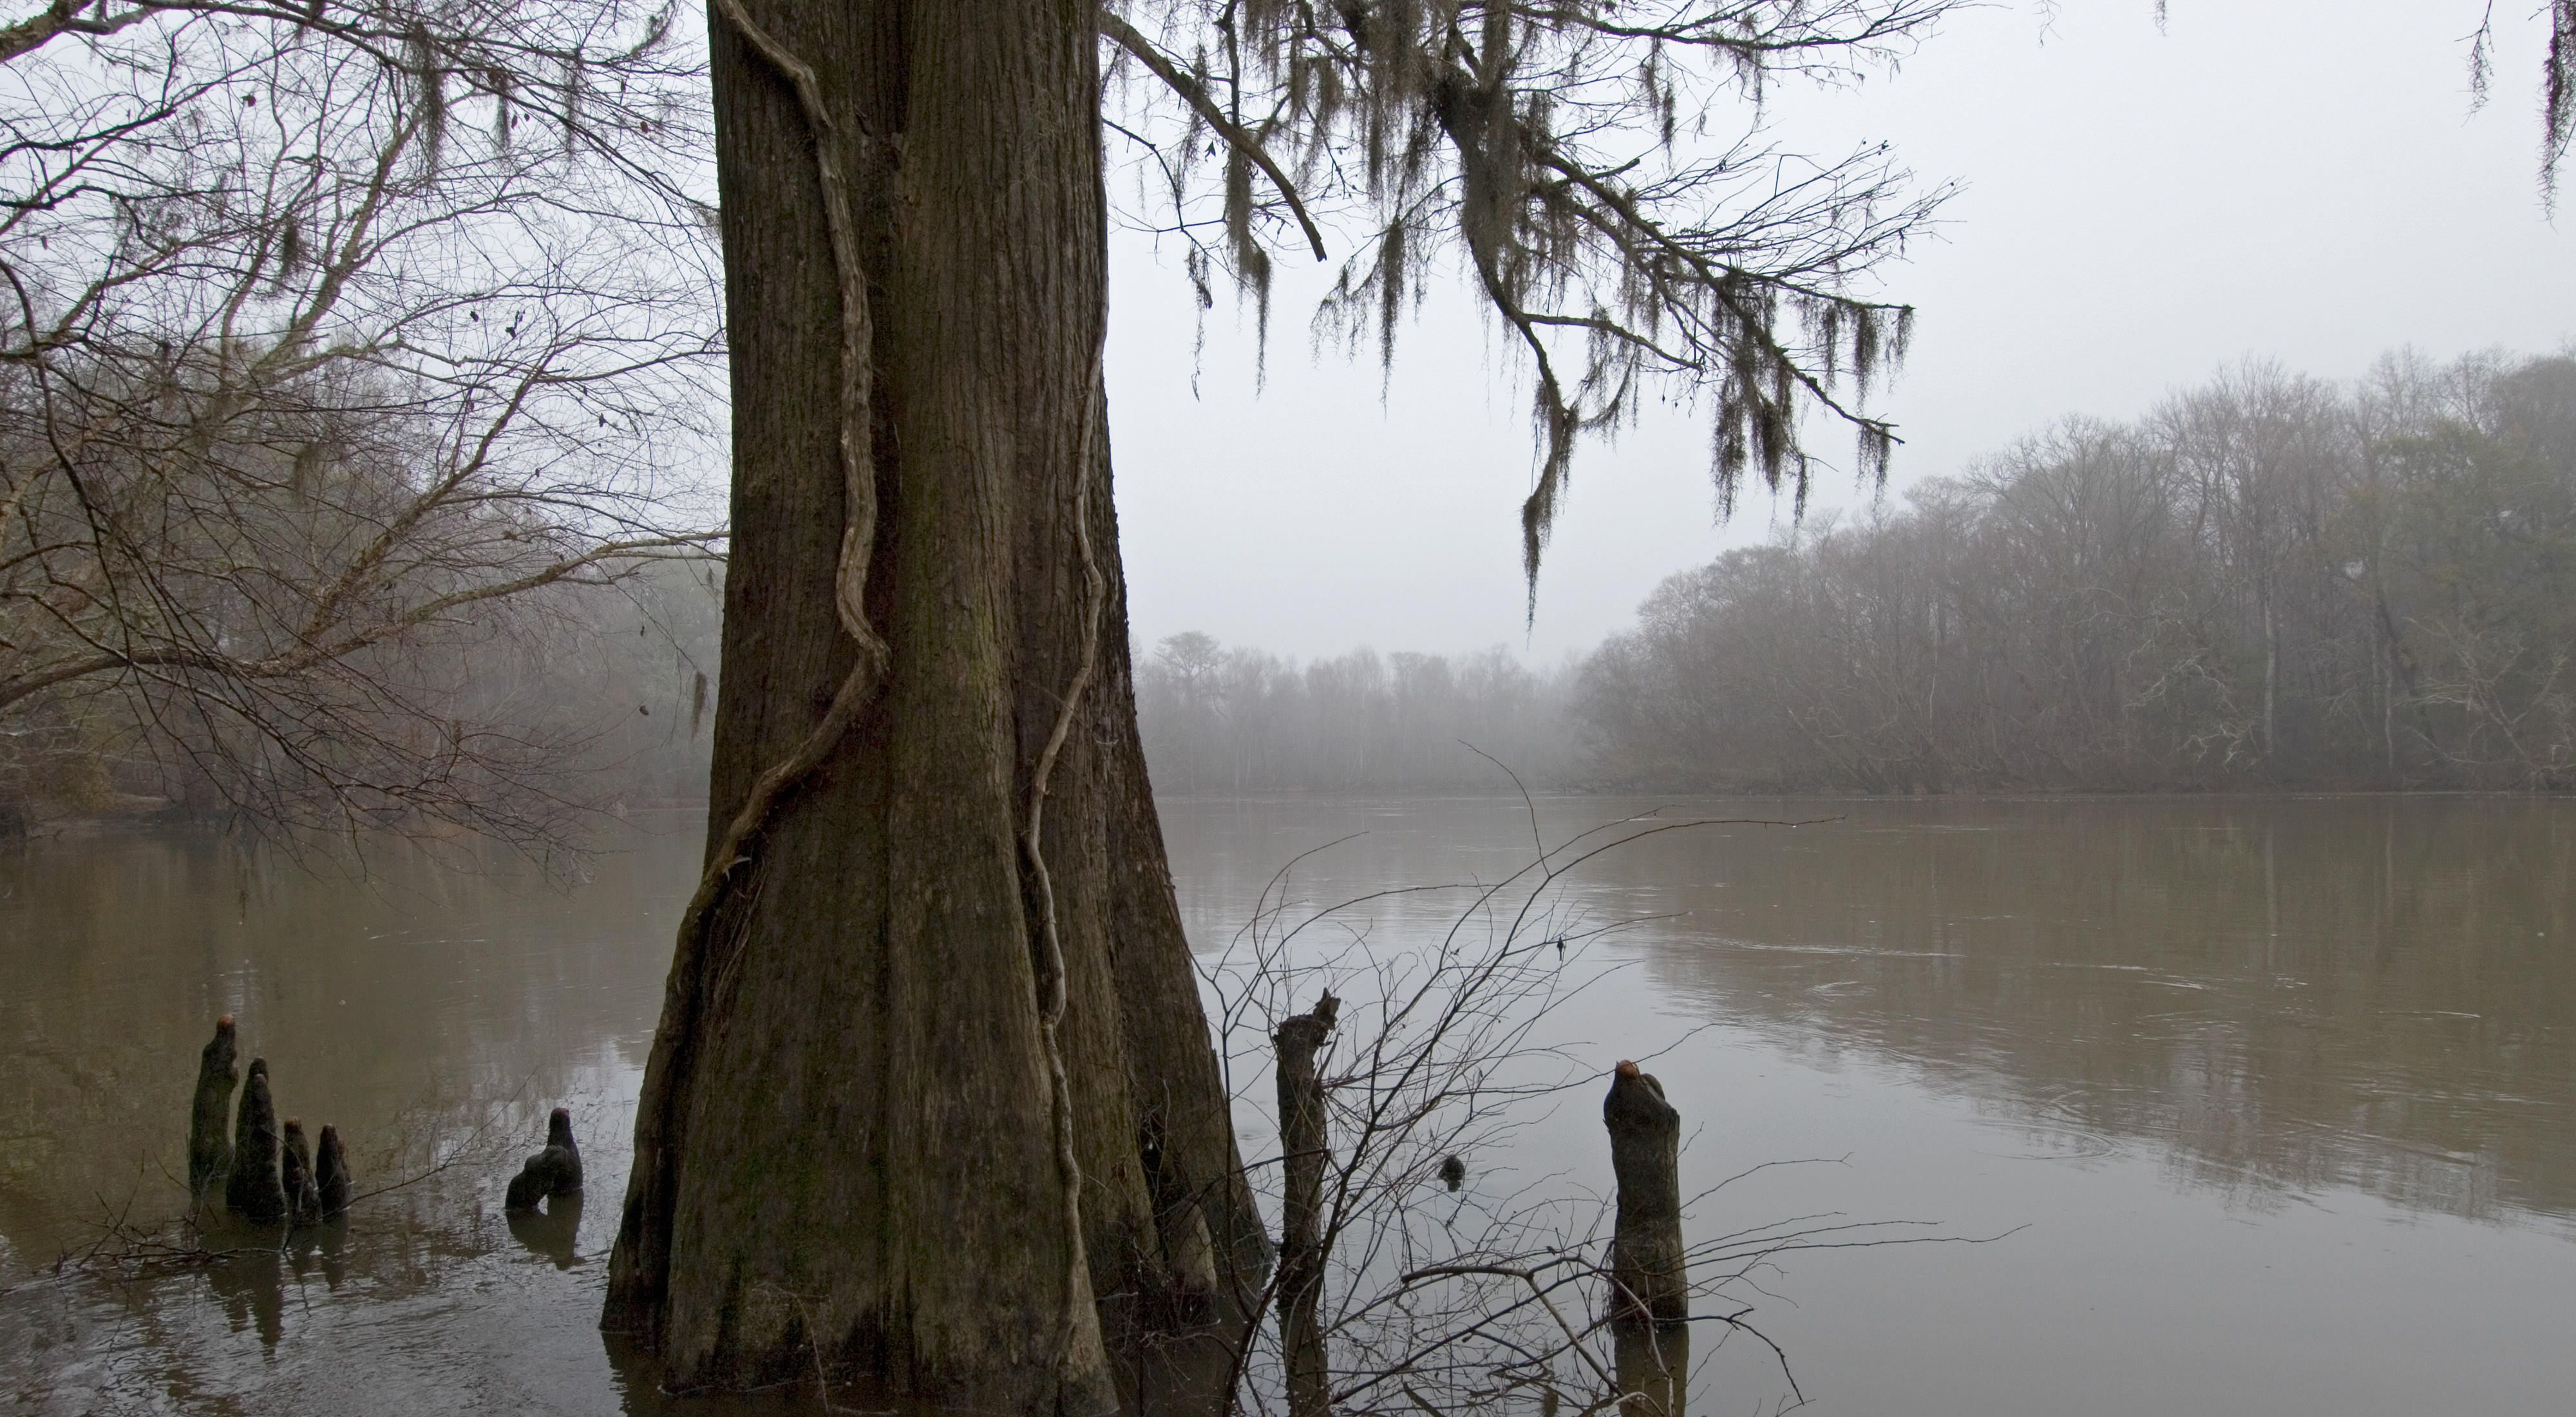 with hanging Spanish Moss is silhouetted by the shroud of winter morning fog that obscures the banks of the Great Pee Dee River.